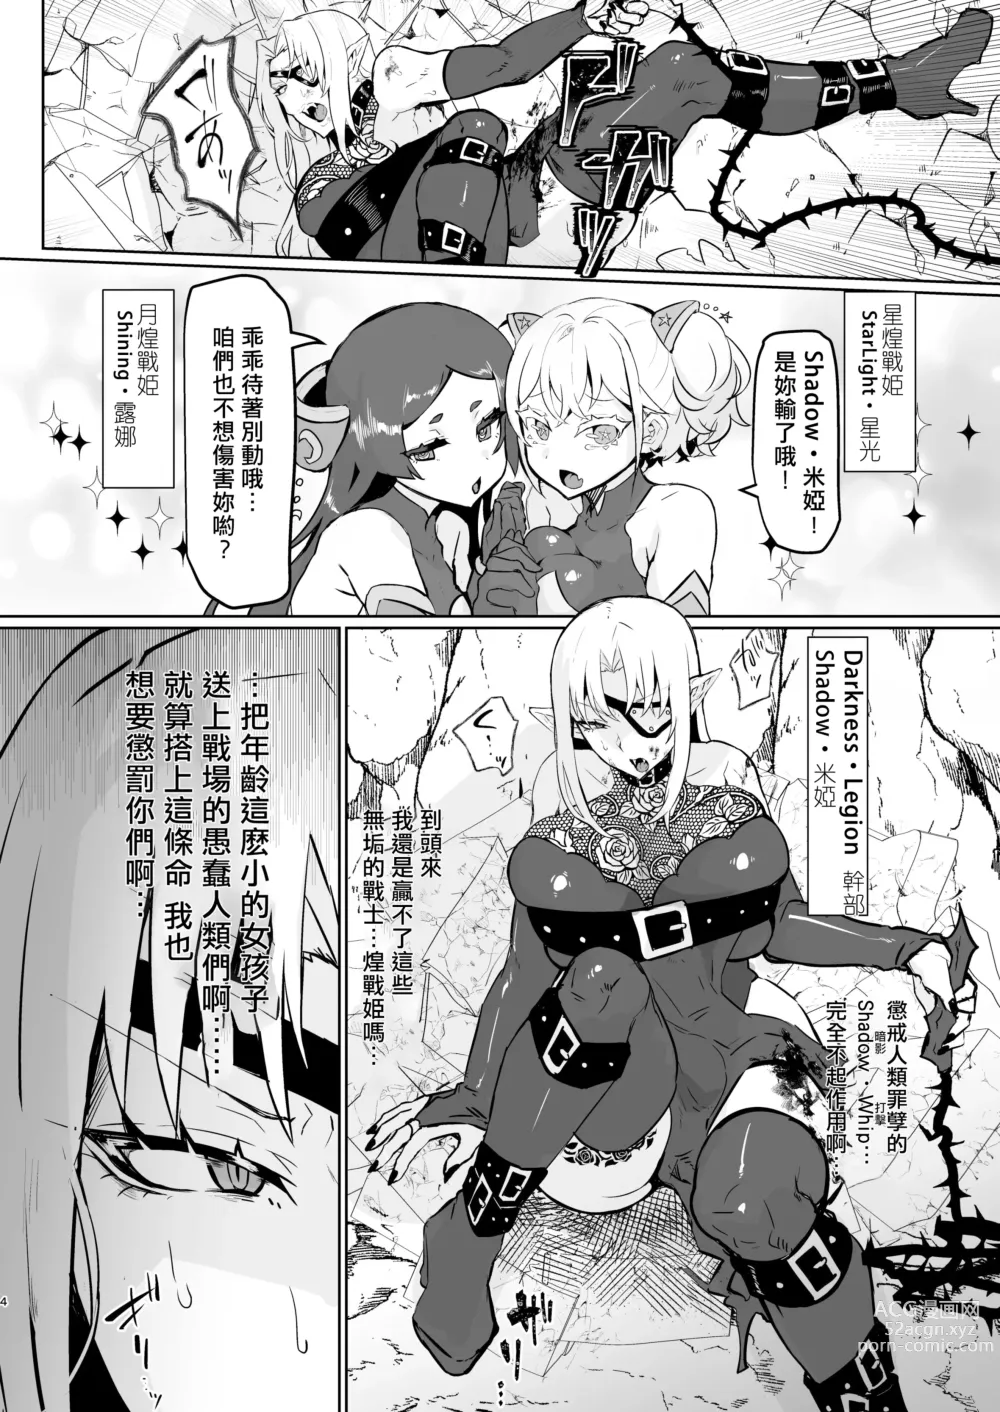 Page 4 of doujinshi 邪恶组织女干部正堕